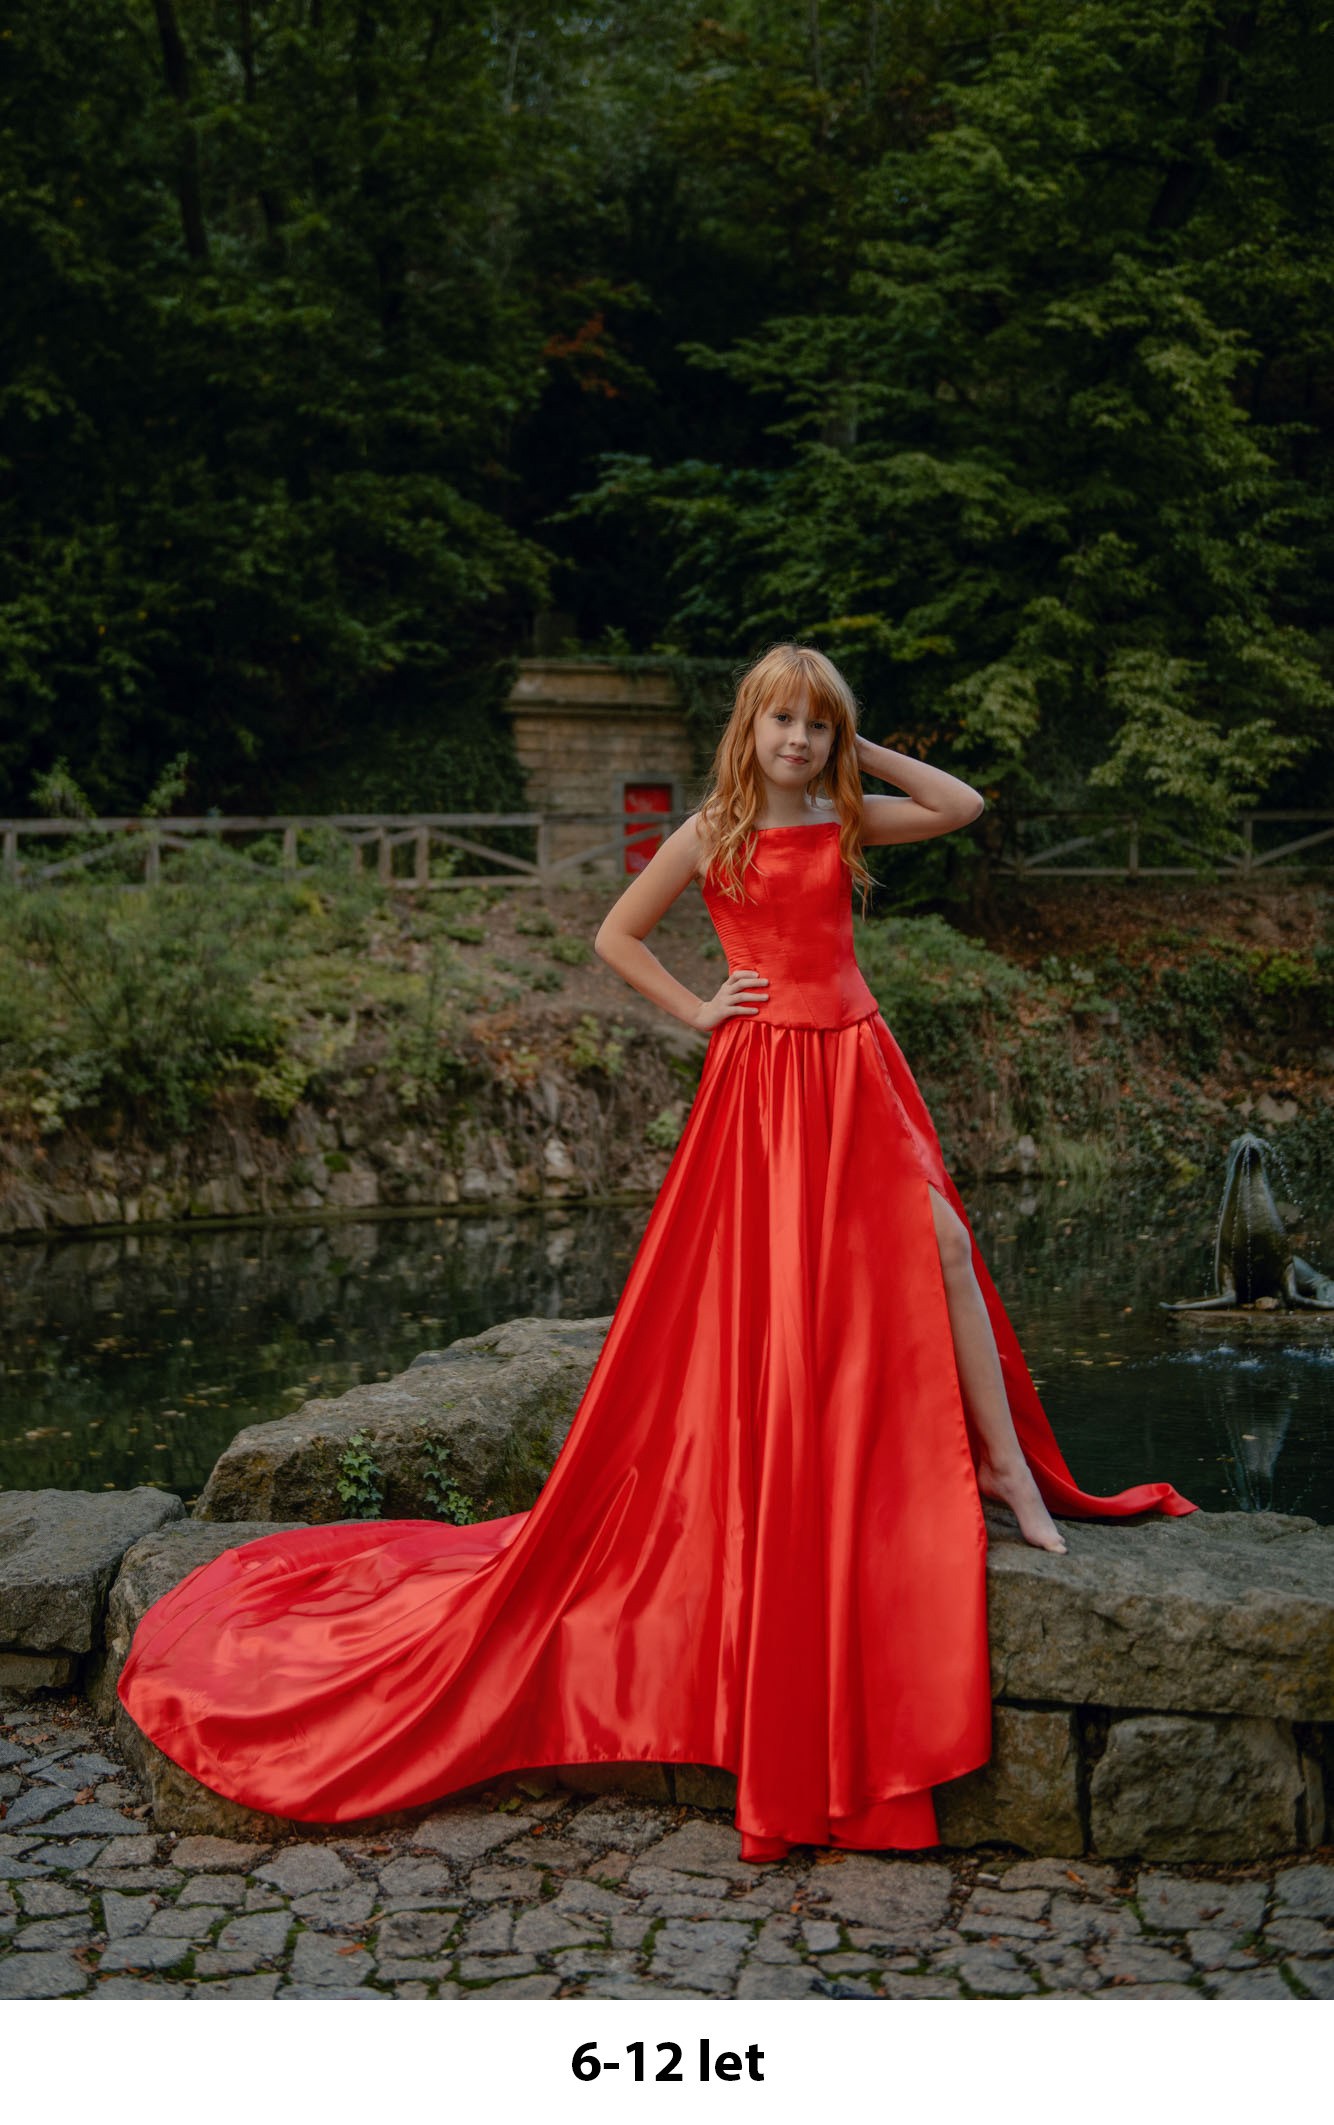 Arts Student Creates Fairytale Prom Dress for Sister Who Couldn't Afford to  Rent One